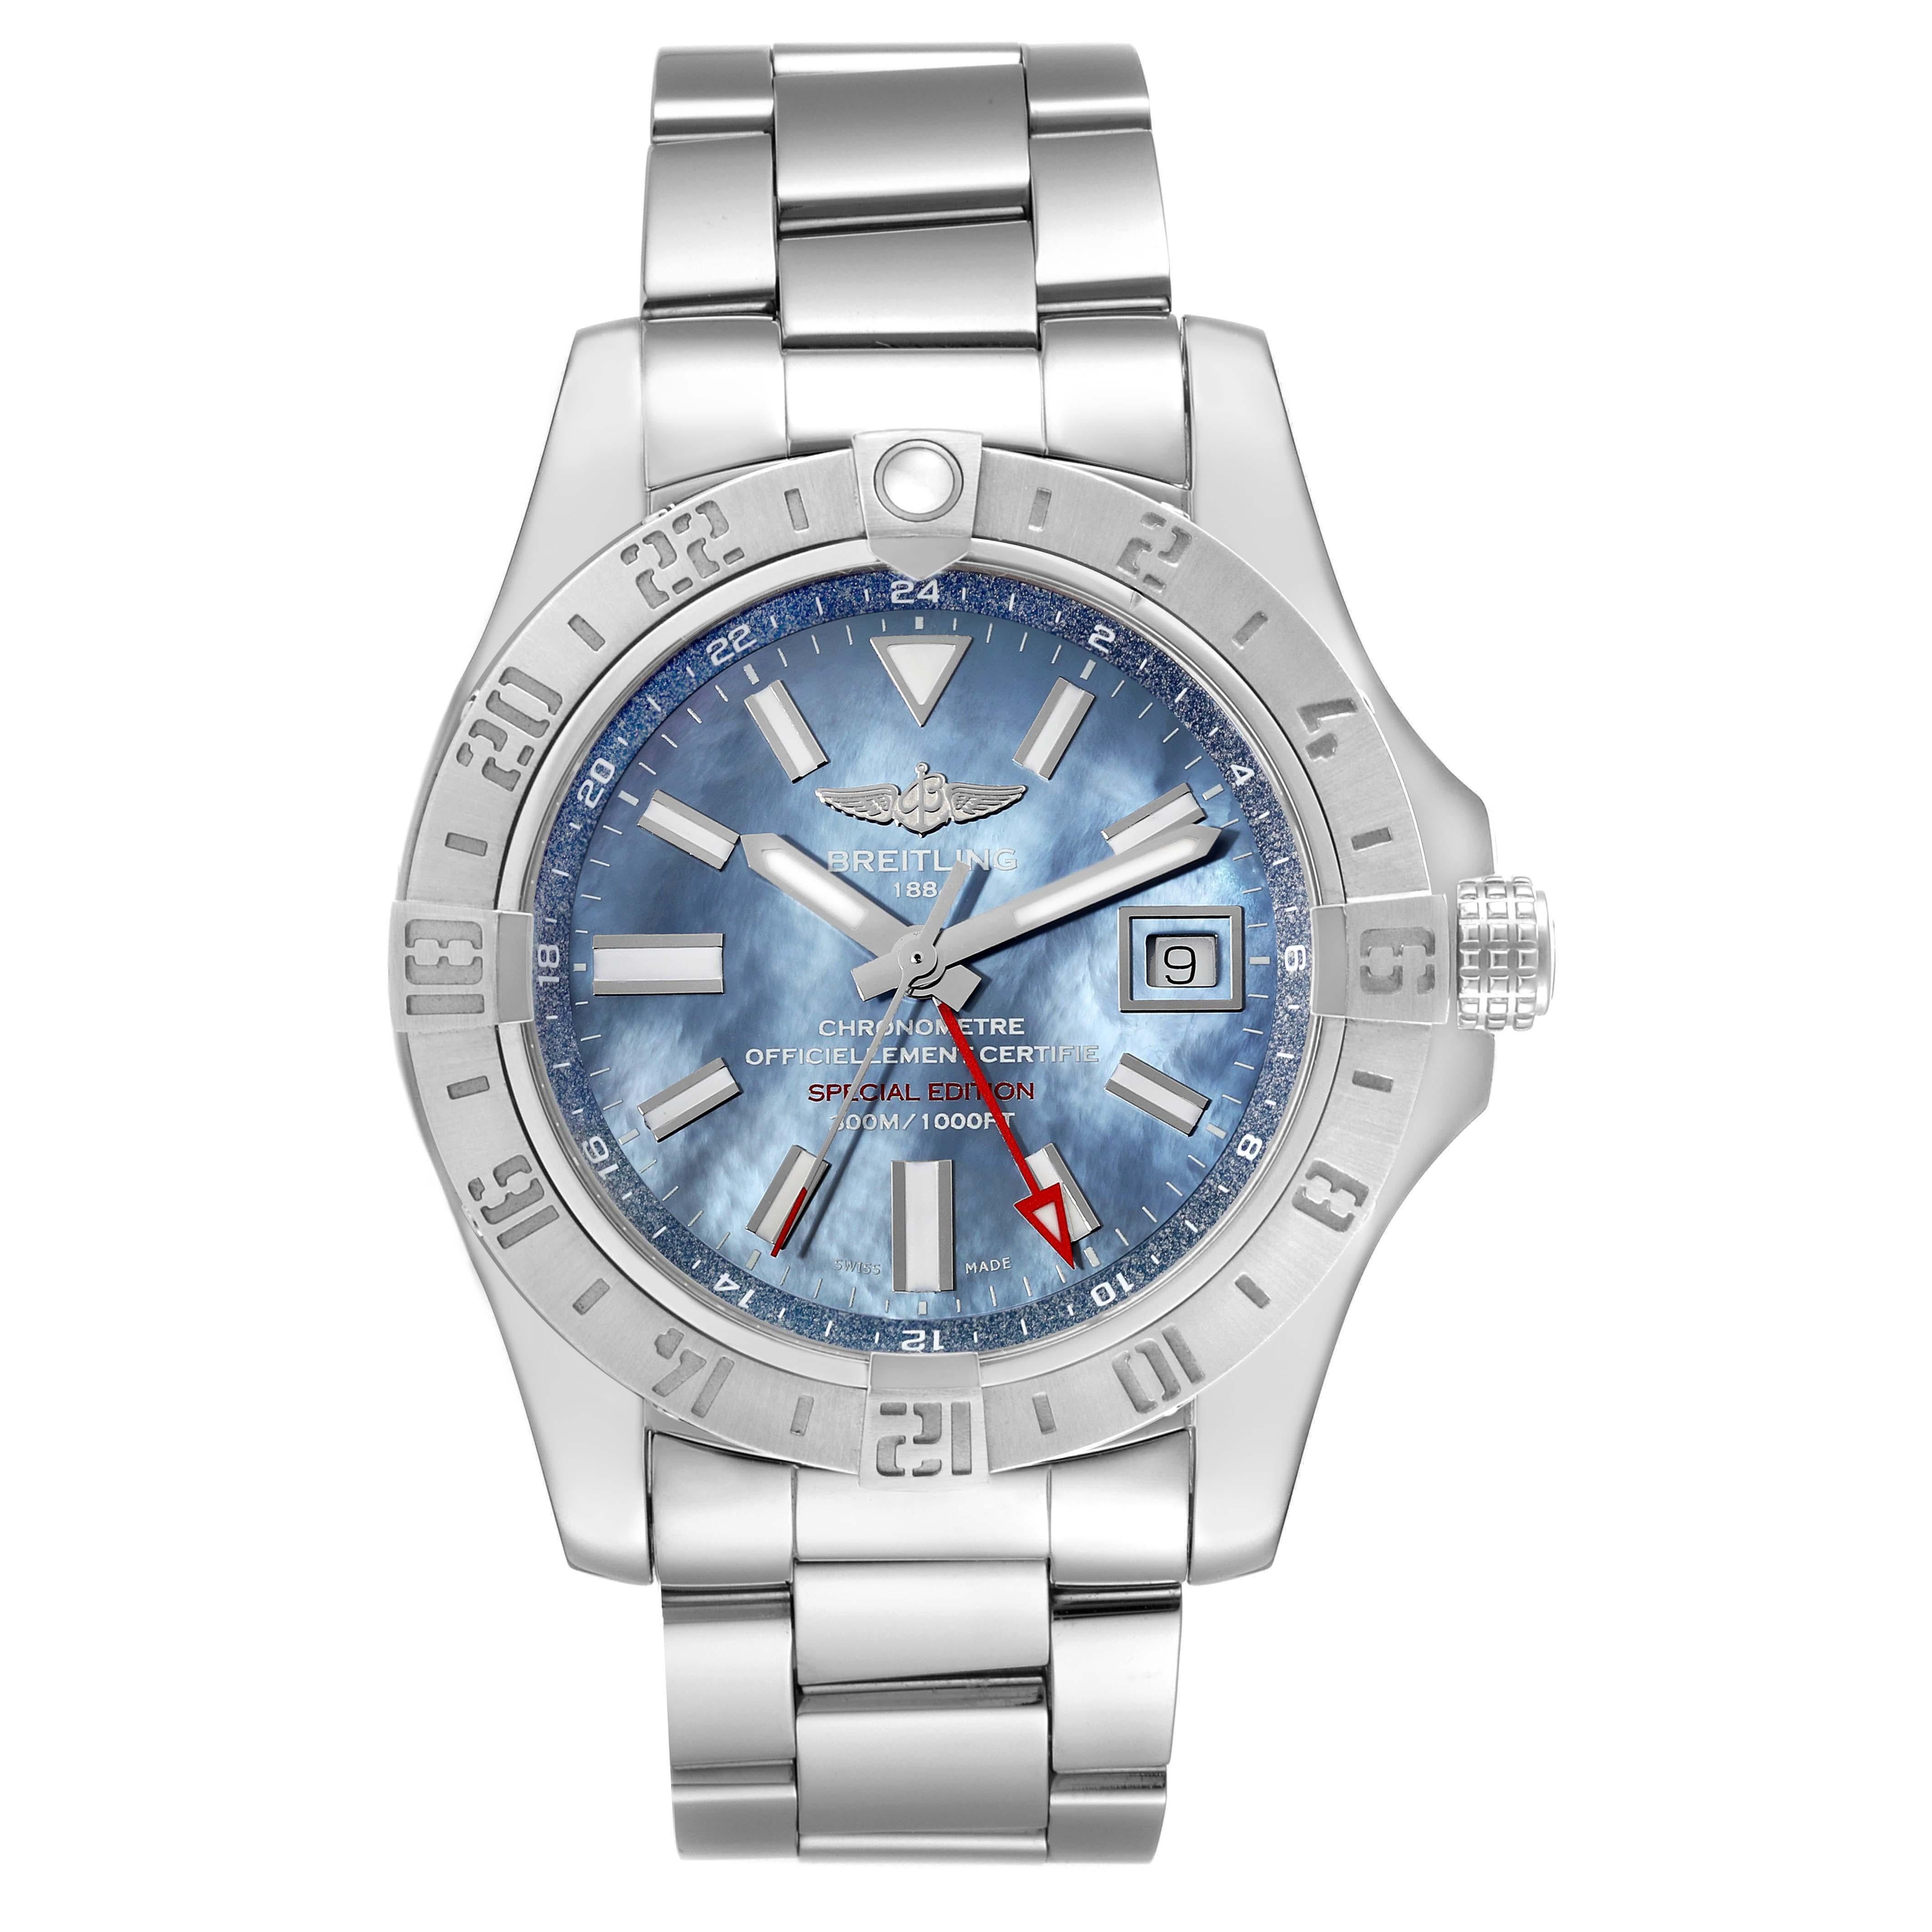 Breitling Avenger II GMT Blue Mother Of Pearl Dial Steel Mens Watch A32390 Box Card. Automatic self-winding movement with GMT function. Stainless steel case 43 mm in diameter with screw-down crown. Stainless steel bidirectional rotating bezel with